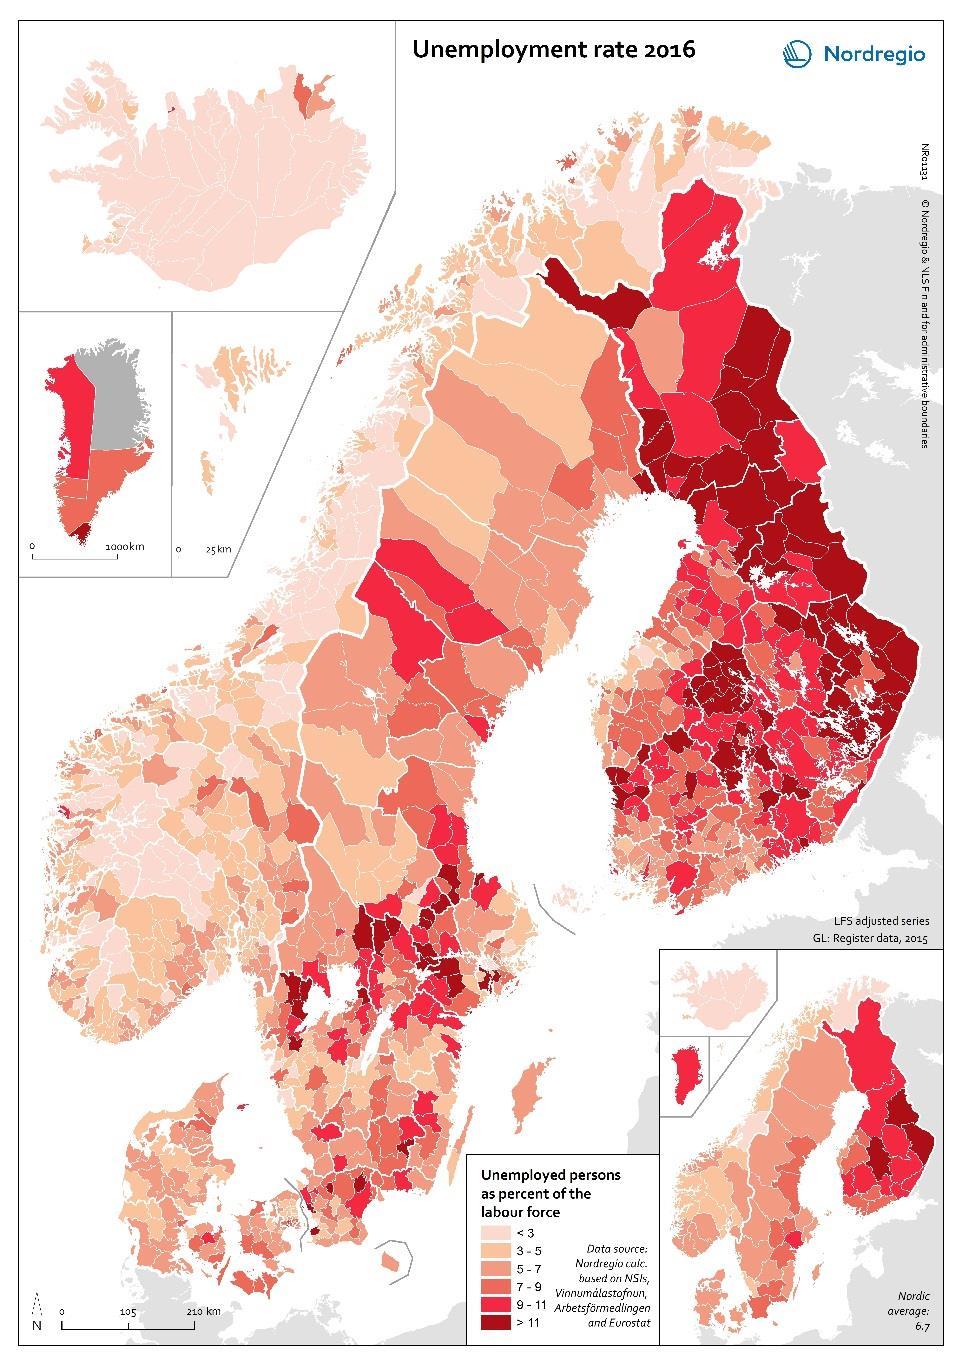 In general, jobs tend to move from rural to urban areas and many municipalities are not as resilient to change as the general Nordic trend would